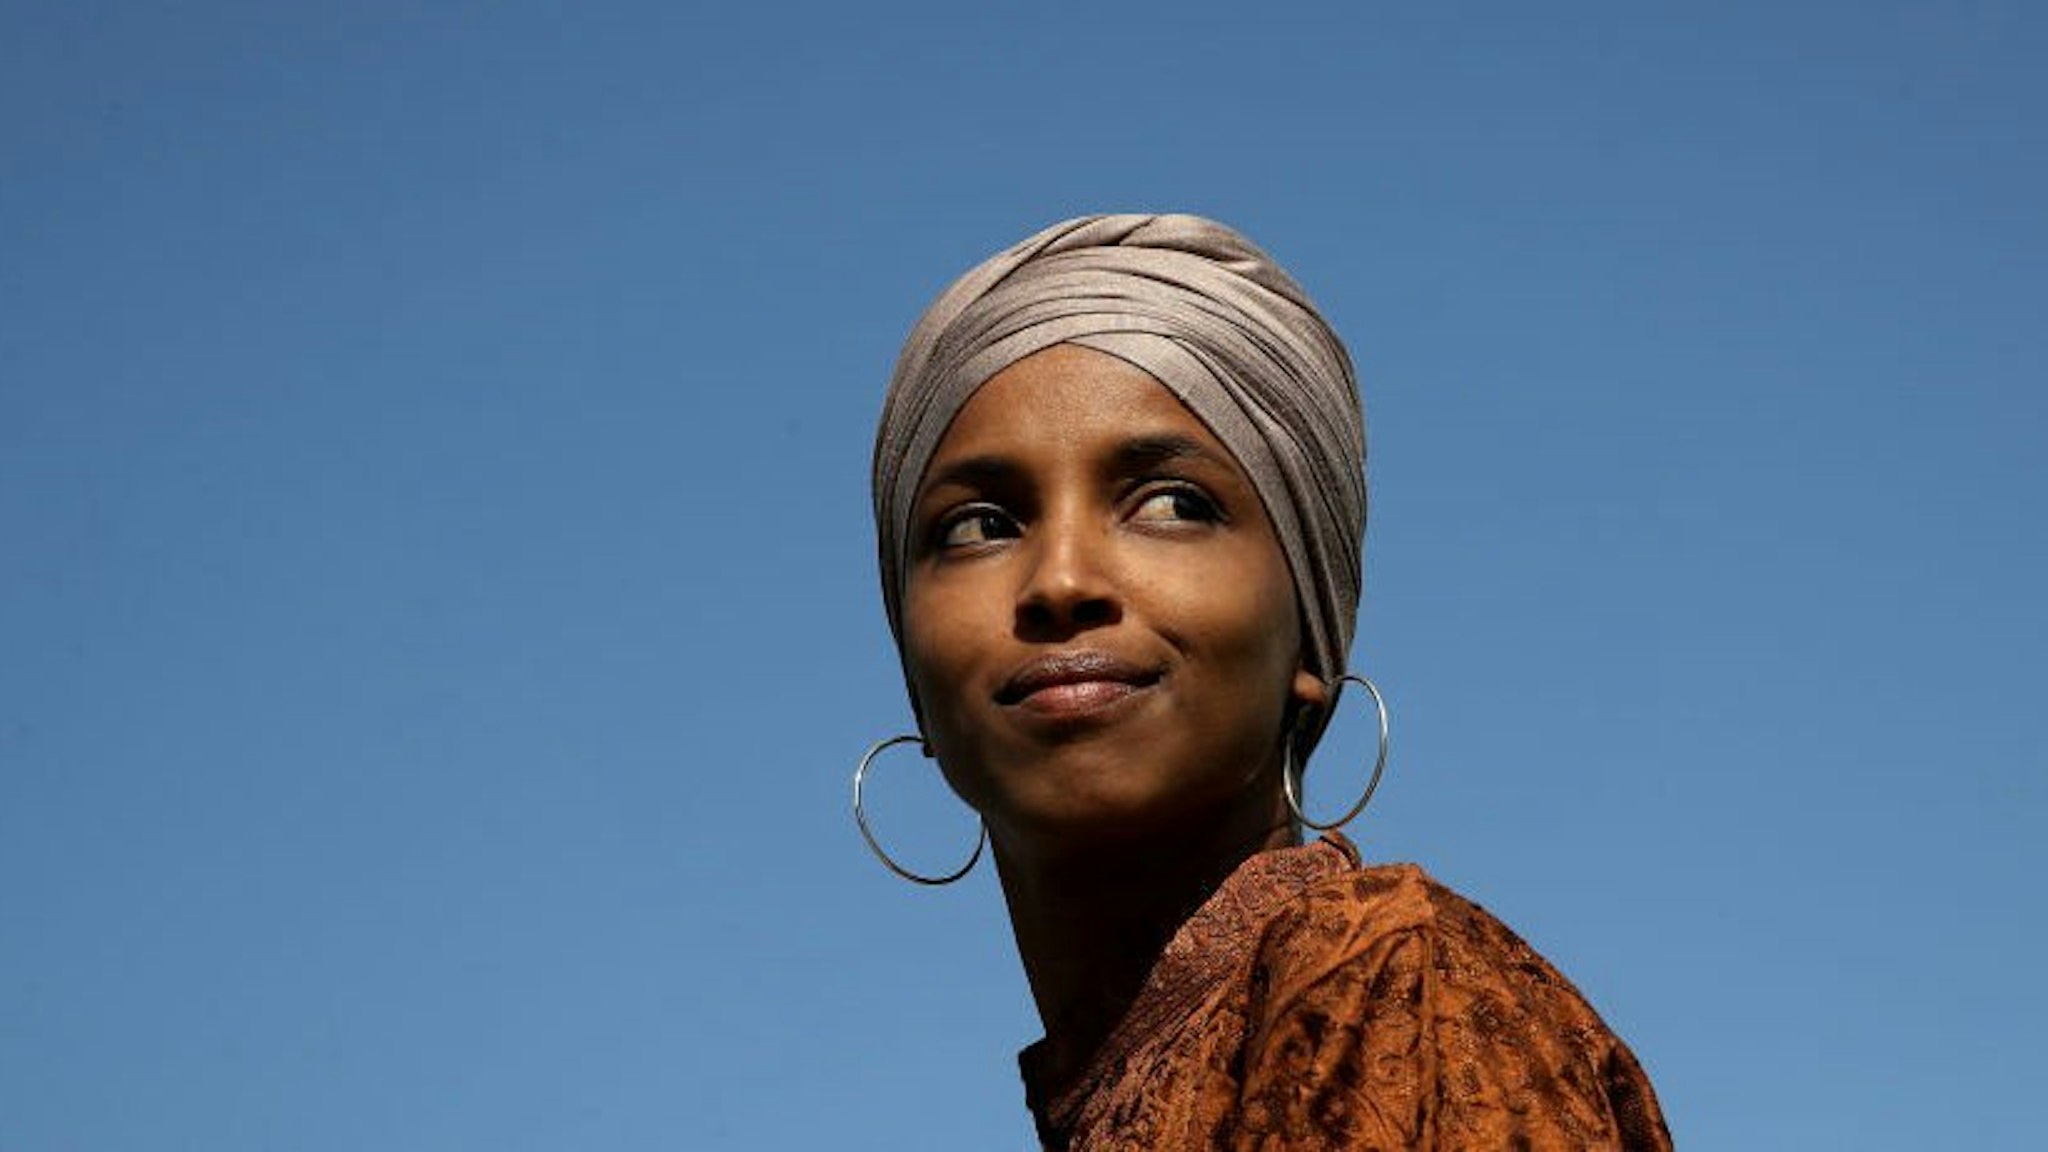 Rep. Ilhan Omar (D-MN) speaks at a press conference outside the U.S. Capitol July 25, 2019 in Washington, DC.